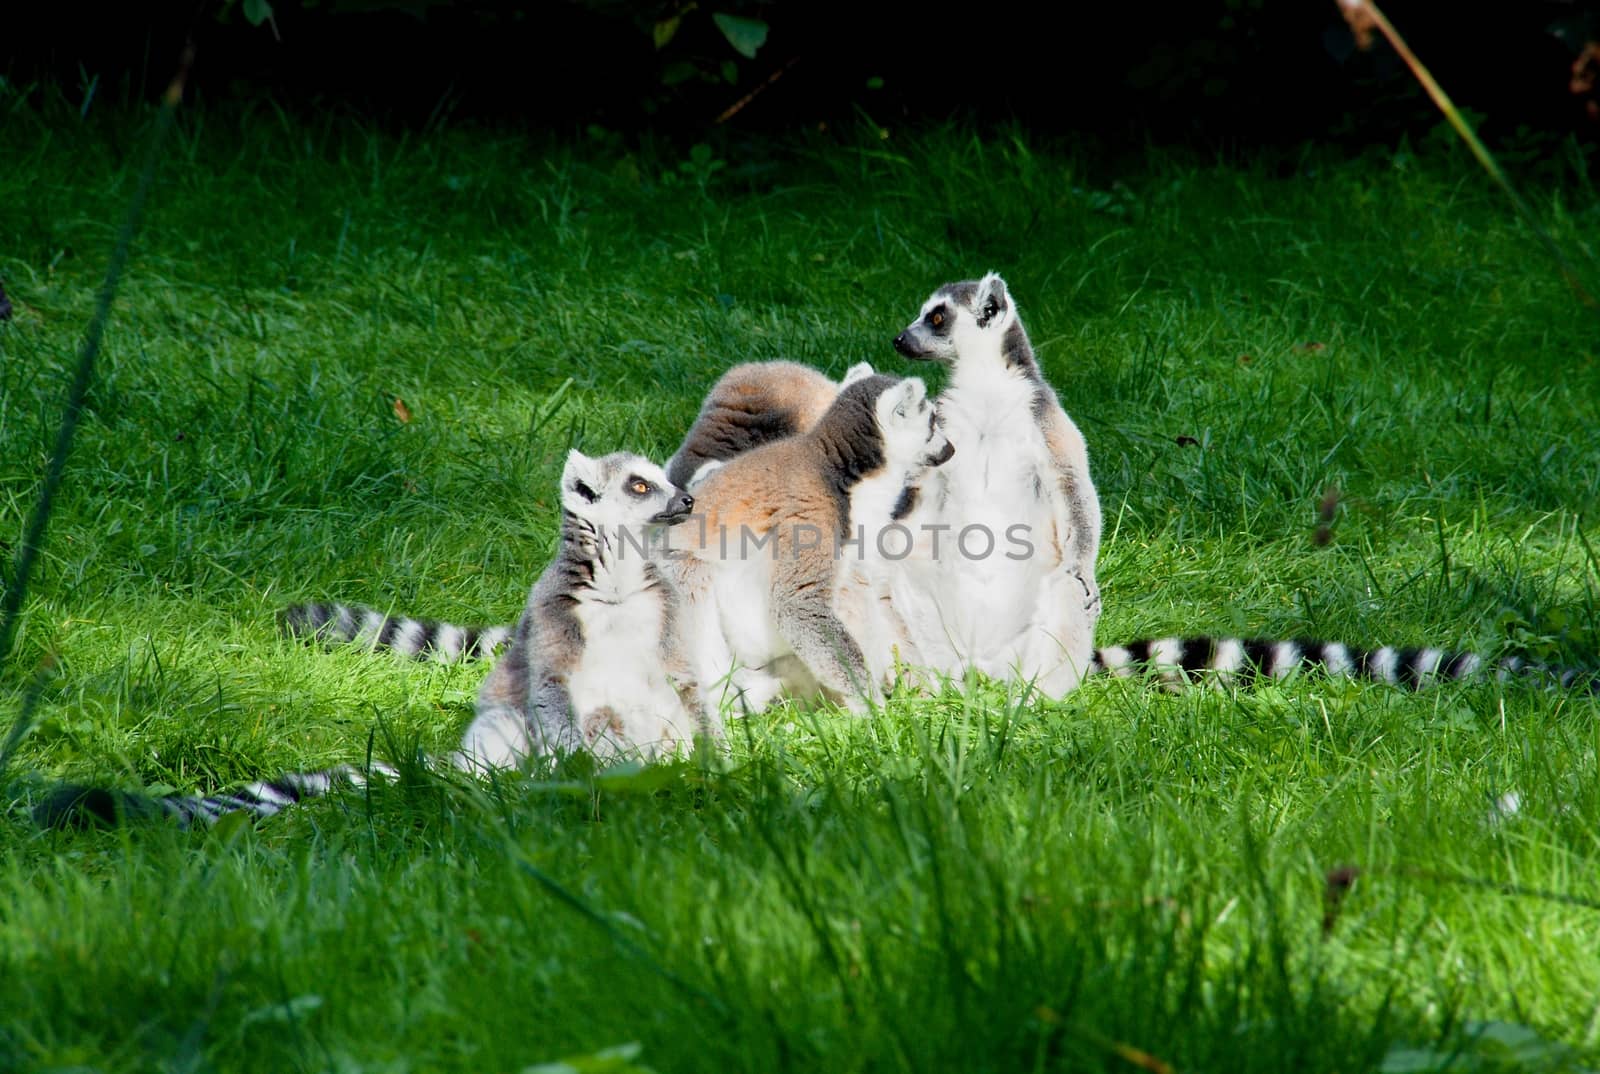 Photo shows a closeup of a lemur family on the grass.